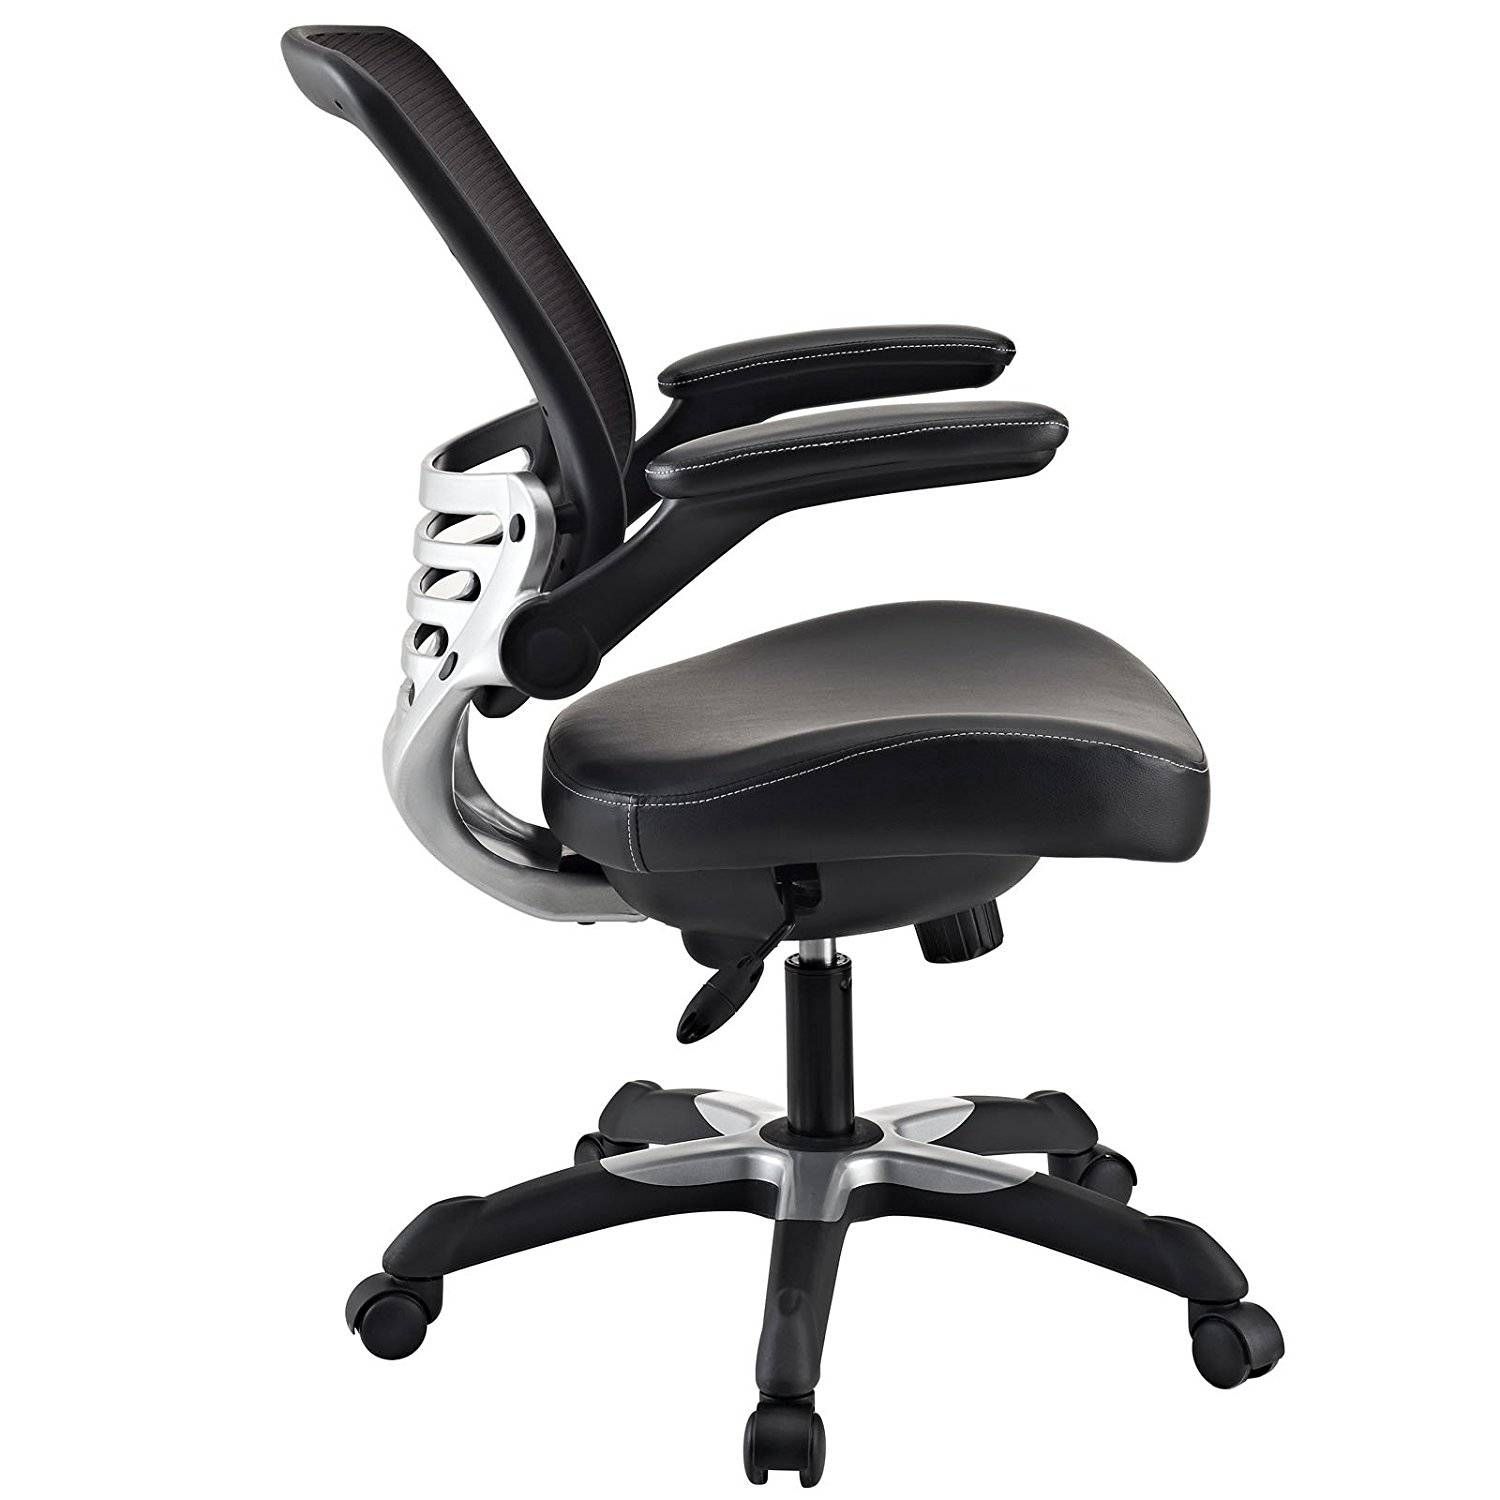 ▻ Chairs : 5 Great Computer Chairs Great Office Chairs Sofas Pertaining To Ergonomic Sofas And Chairs (View 21 of 30)